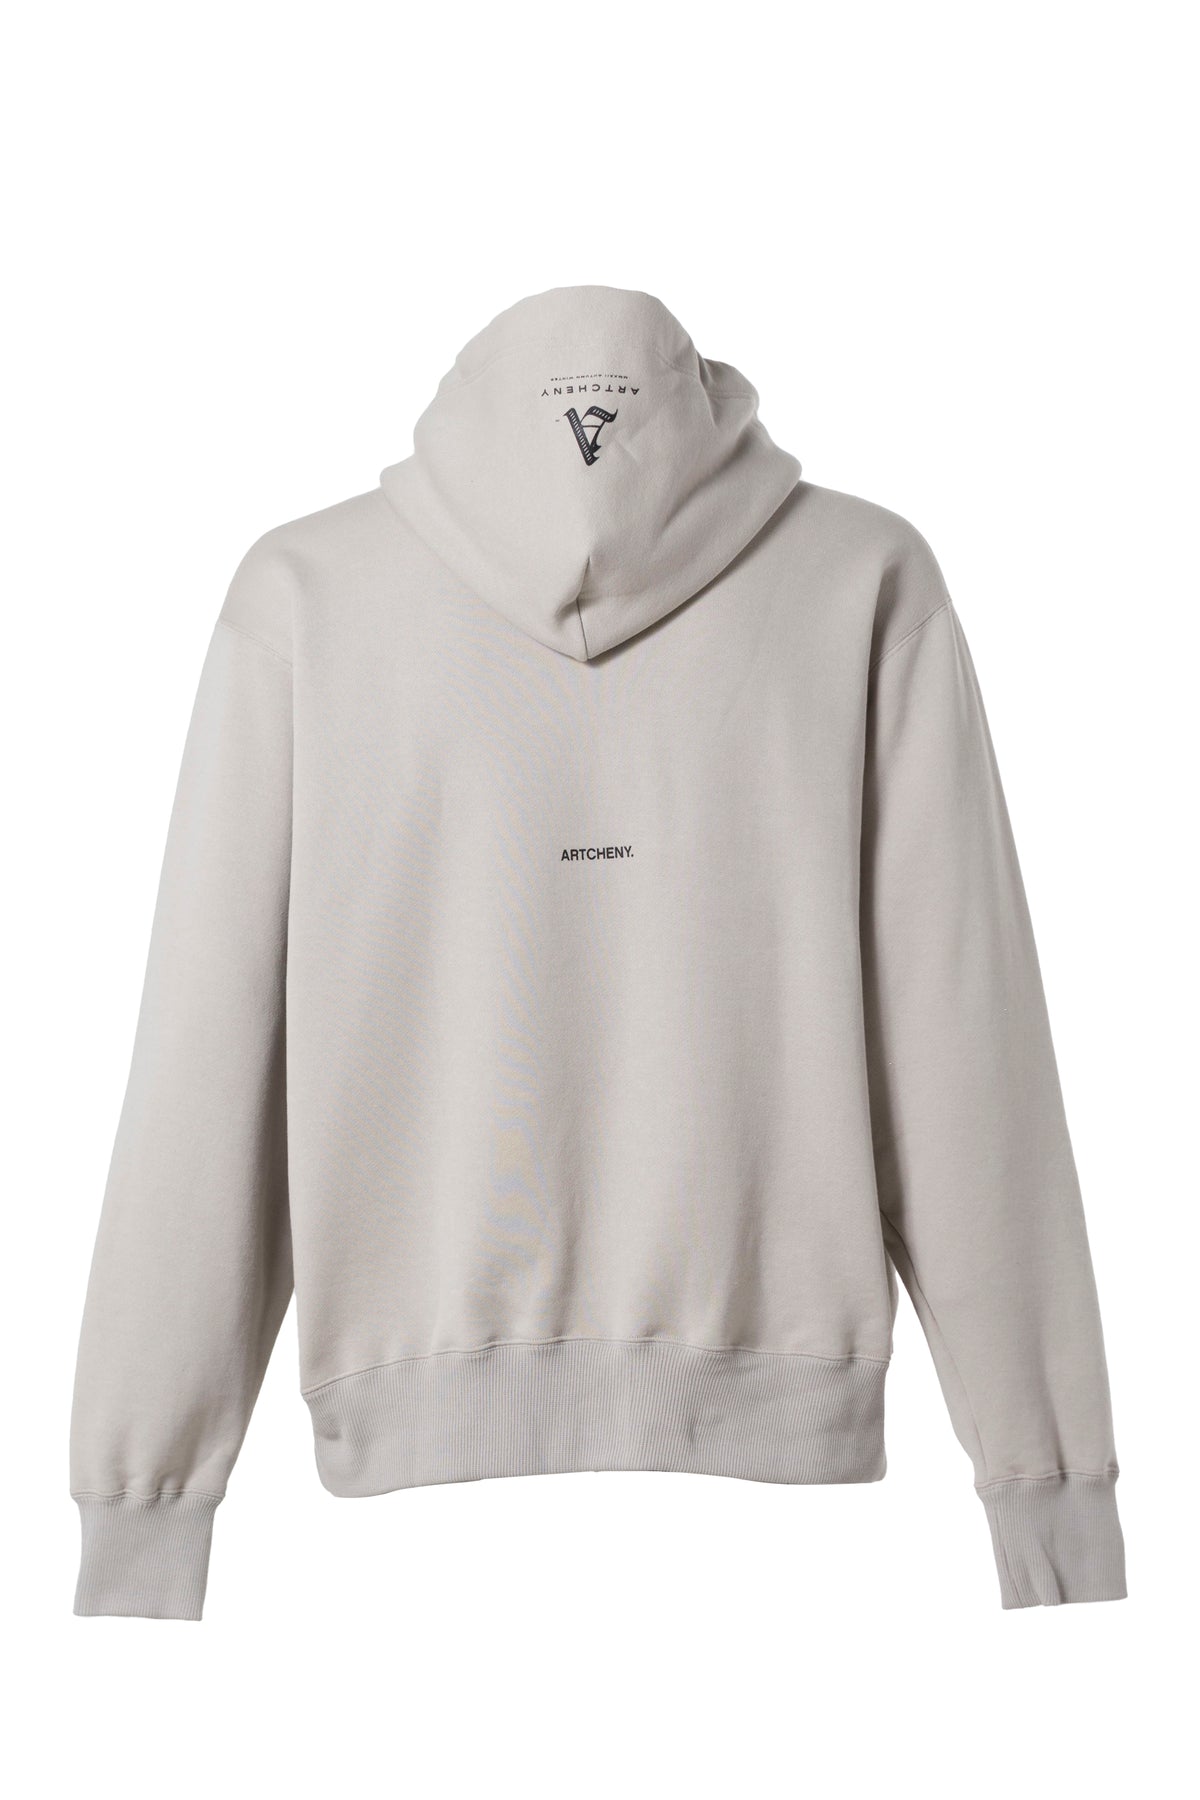 ARTCHENY HOODIE BUTTERFLY / GRY